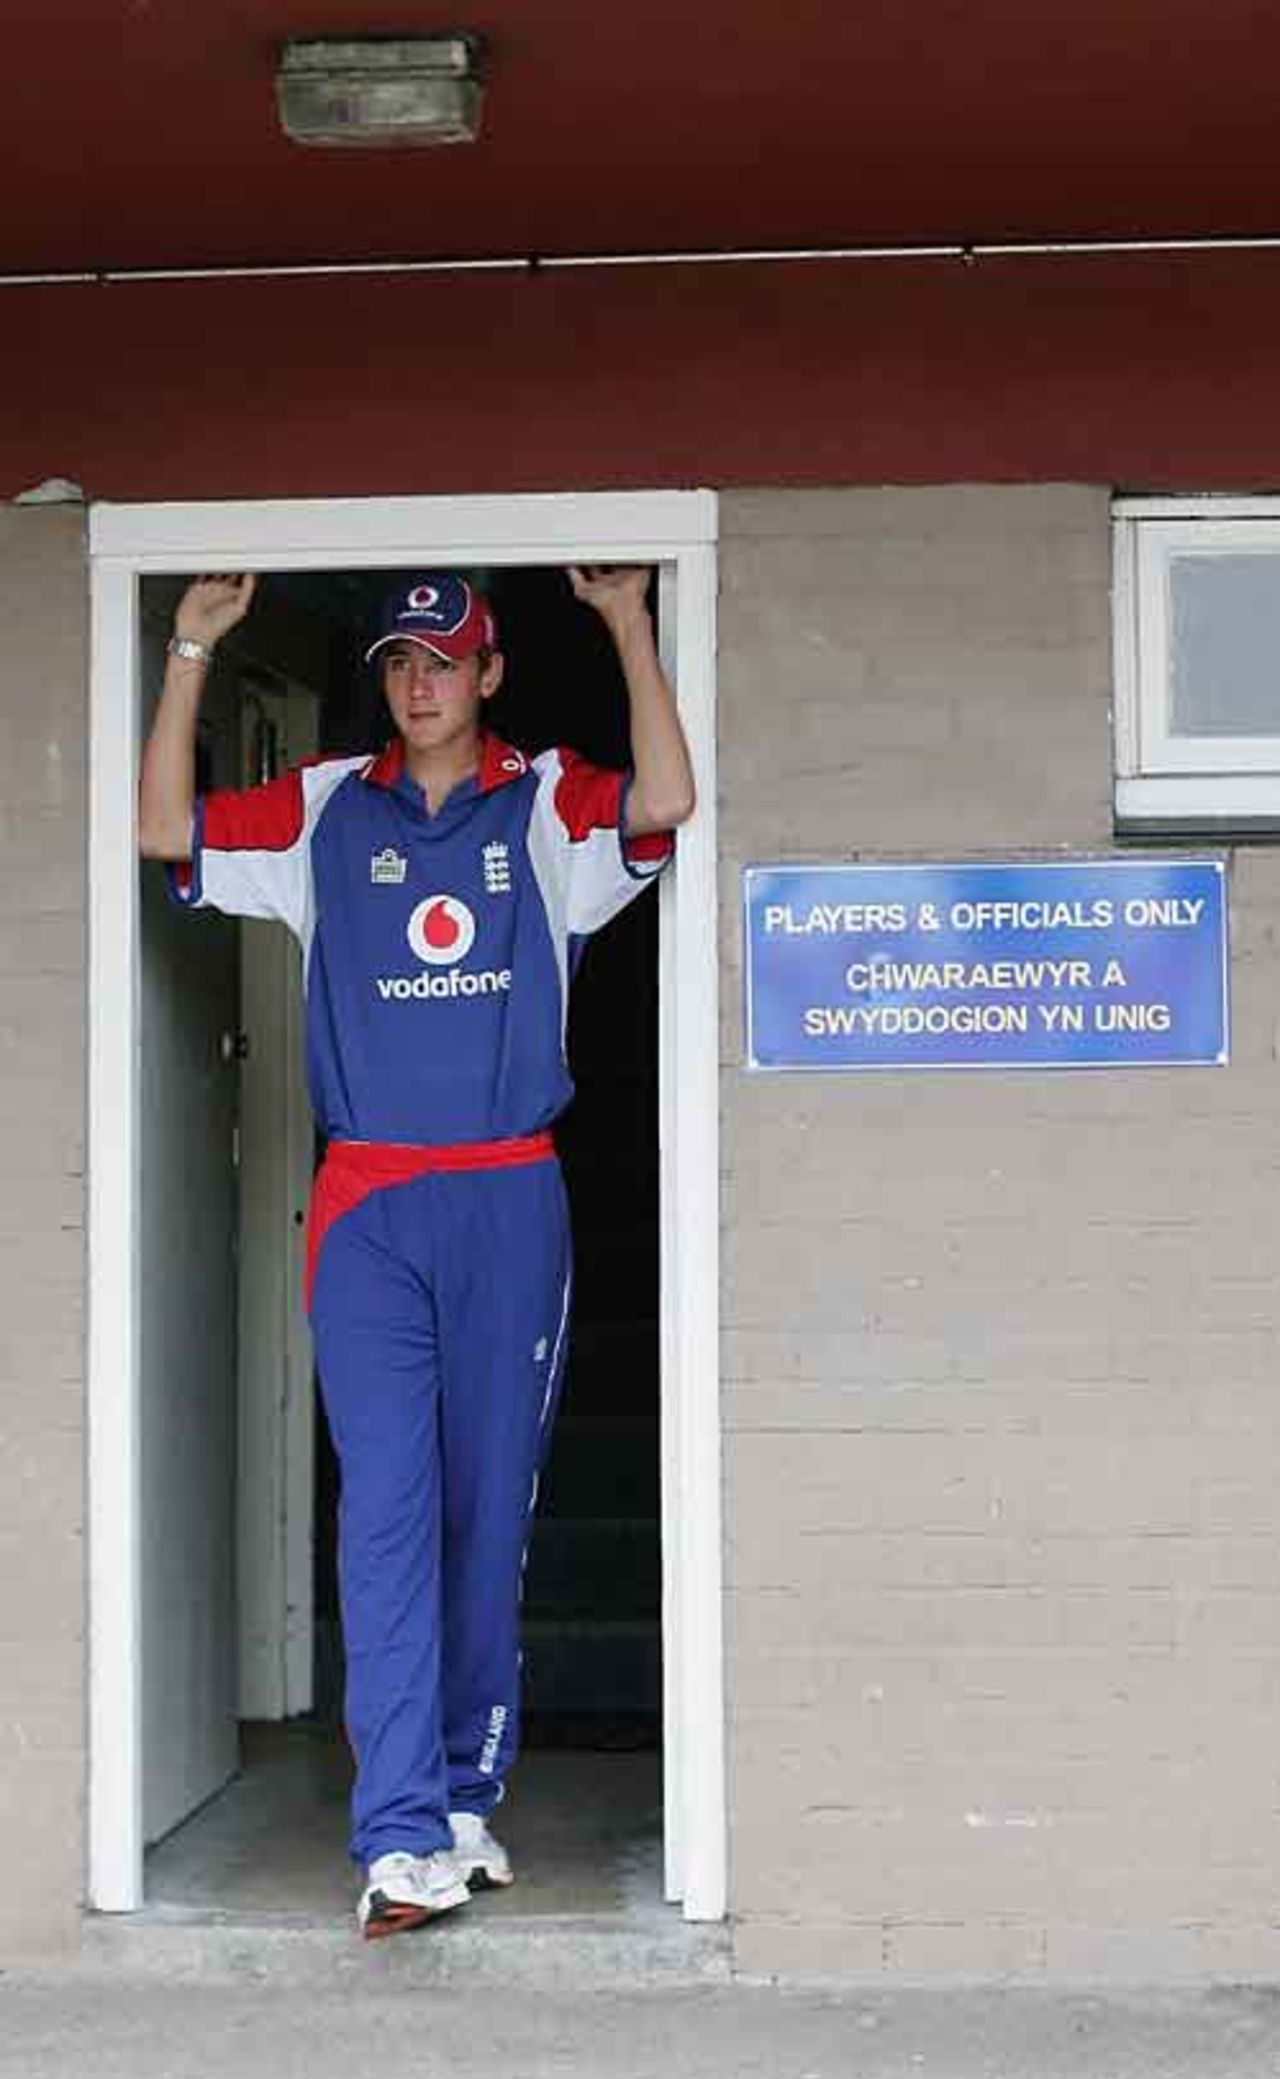 Stuart Broad outside the dressing rooms at Cardiff ahead of the one-day series with Pakistan, Cardiff, August 29, 2006